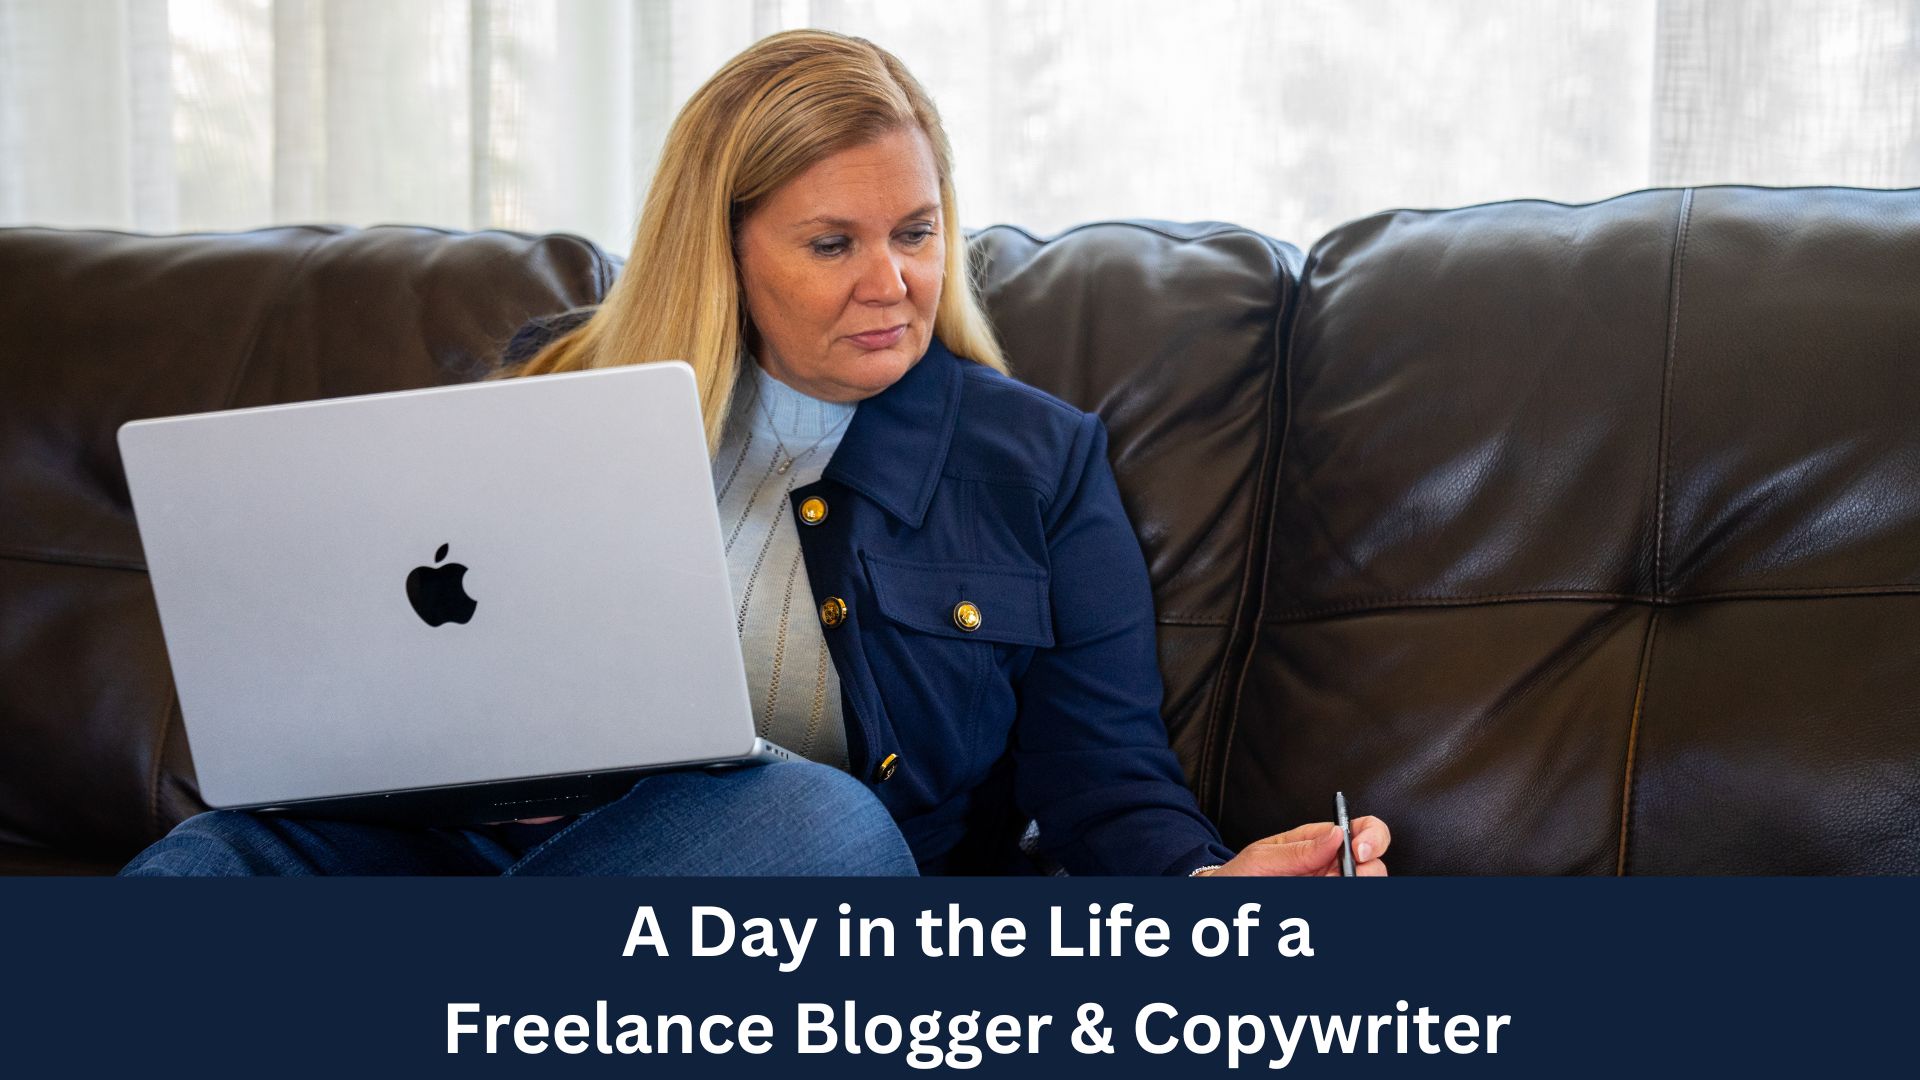 A Day in the Life of a Freelance Blogger & Copywriter